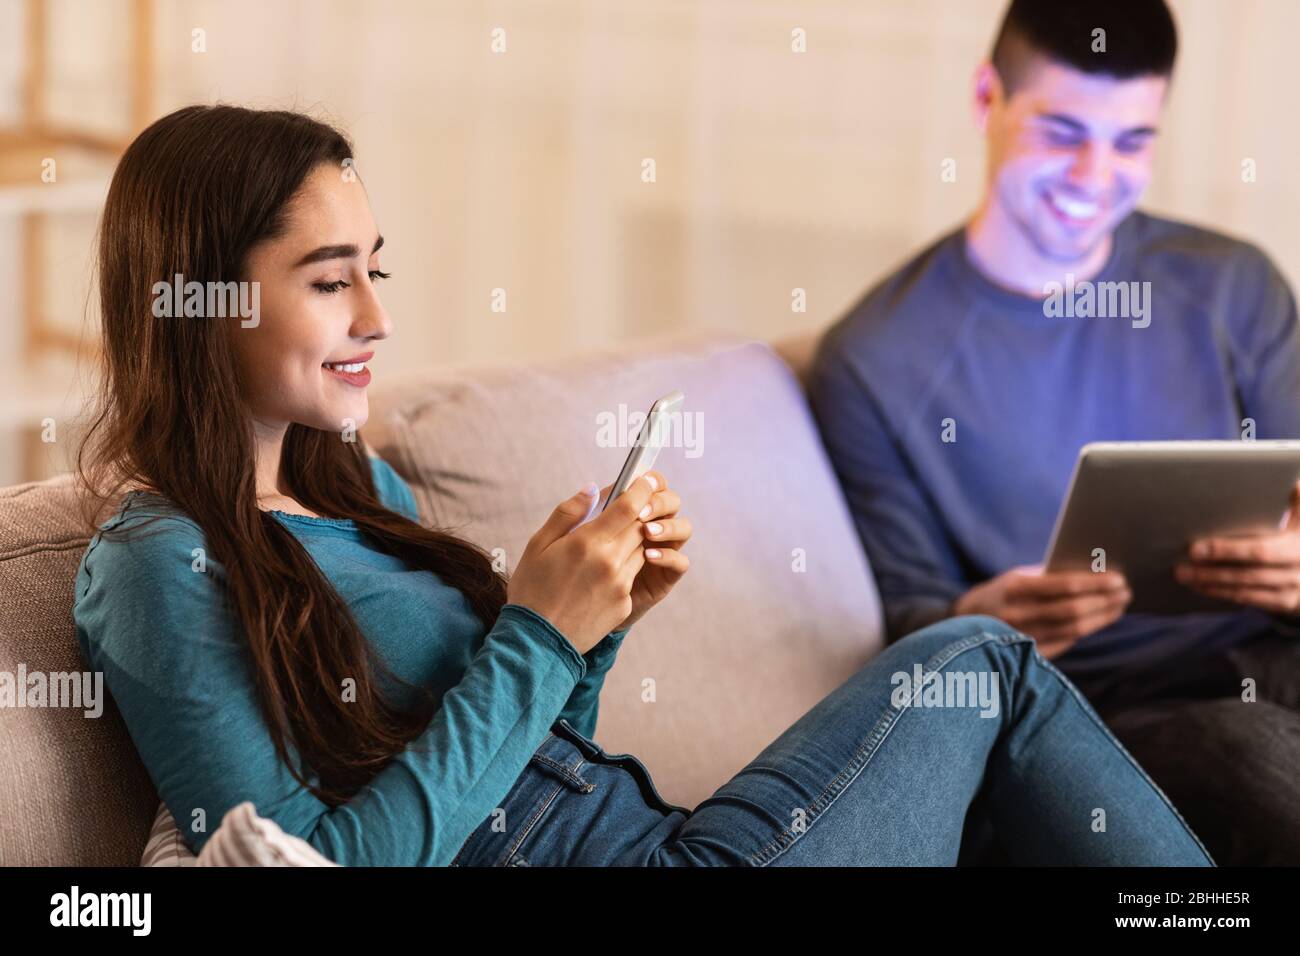 Couple sitting on couch using tablet and cell phone Stock Photo